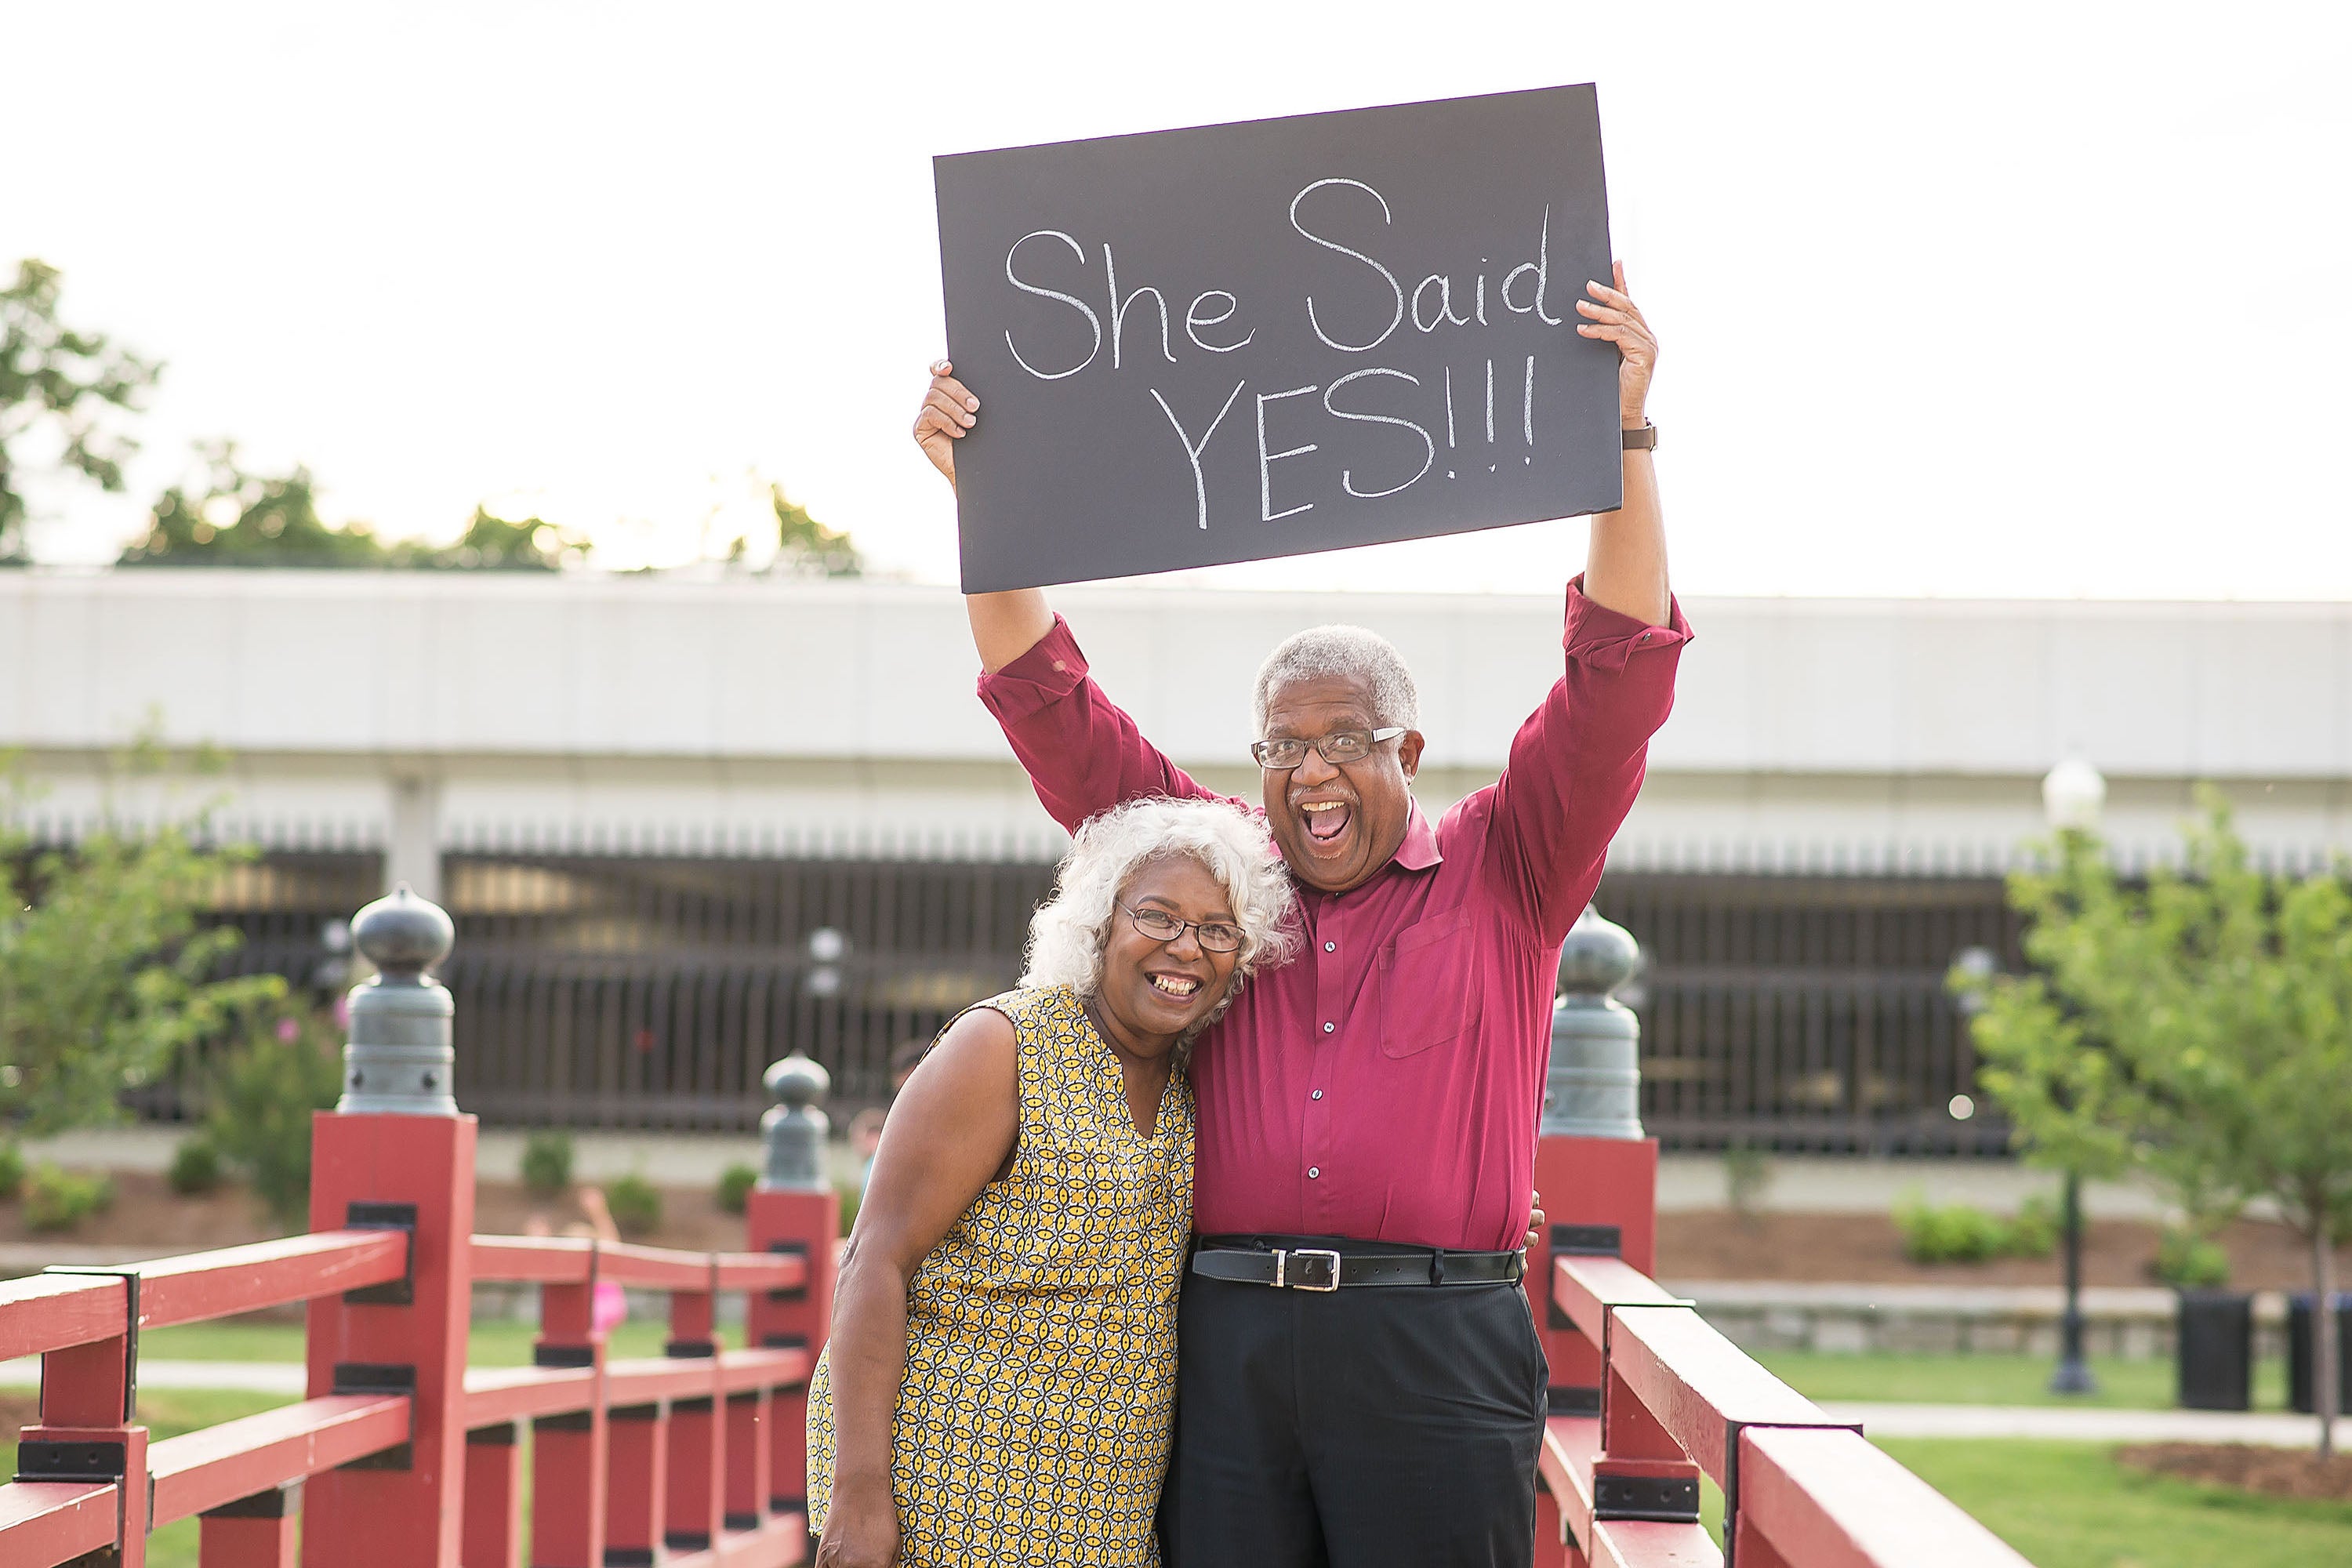 Cute Elderly Couple Who Nearly Broke The Internet With Viral Engagement Photos Ties The Knot
